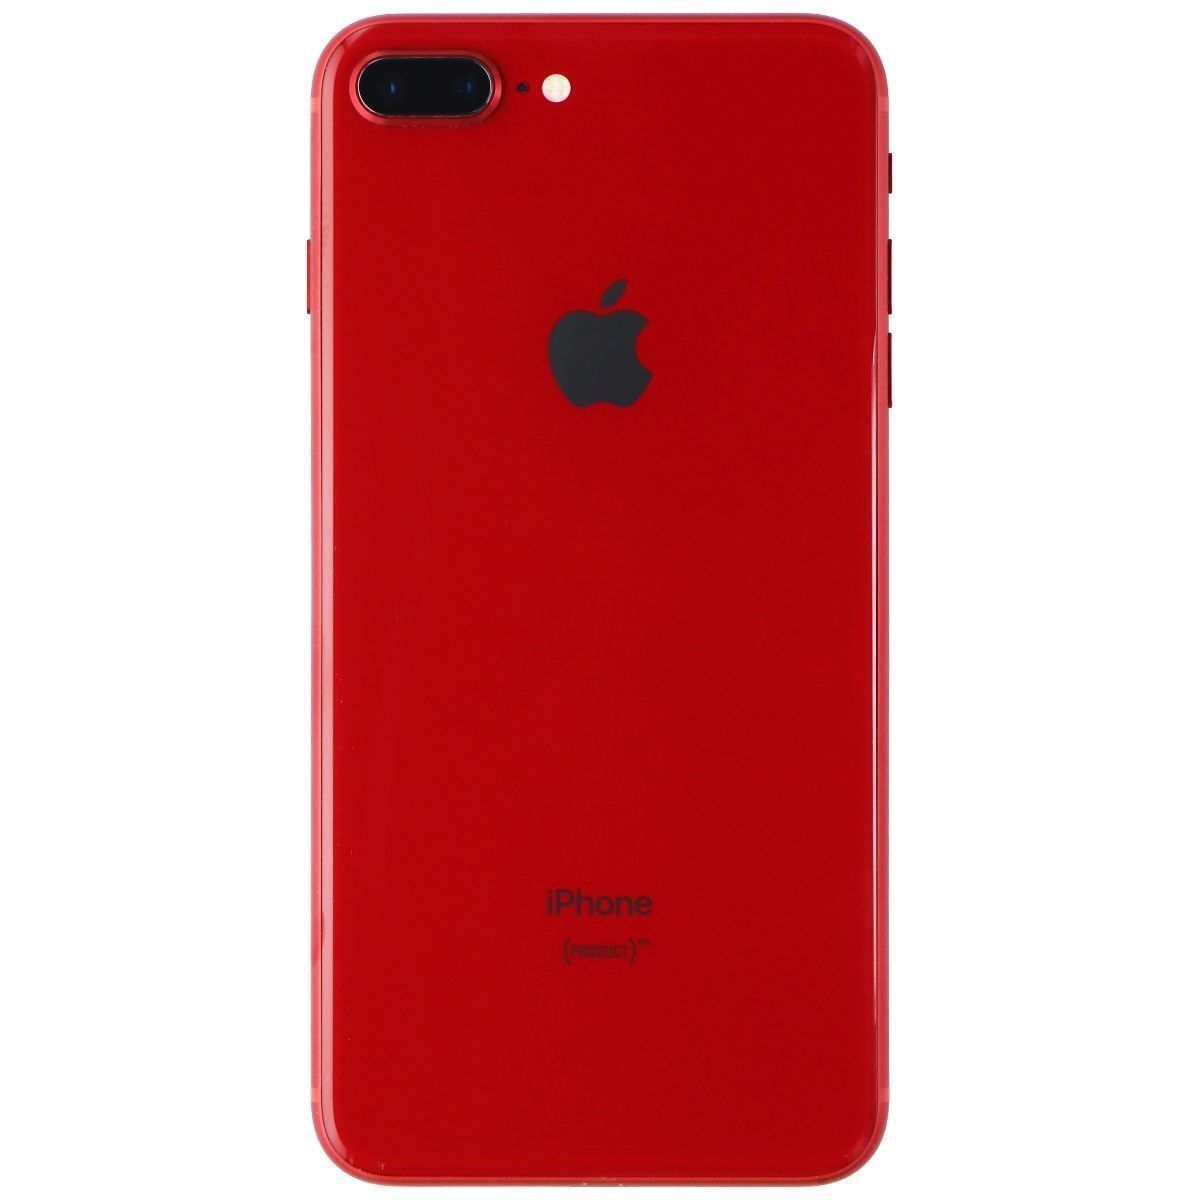 Apple iPhone 8 Plus (5.5-inch) Smartphone (A1897) Unlocked - 64GB / Red